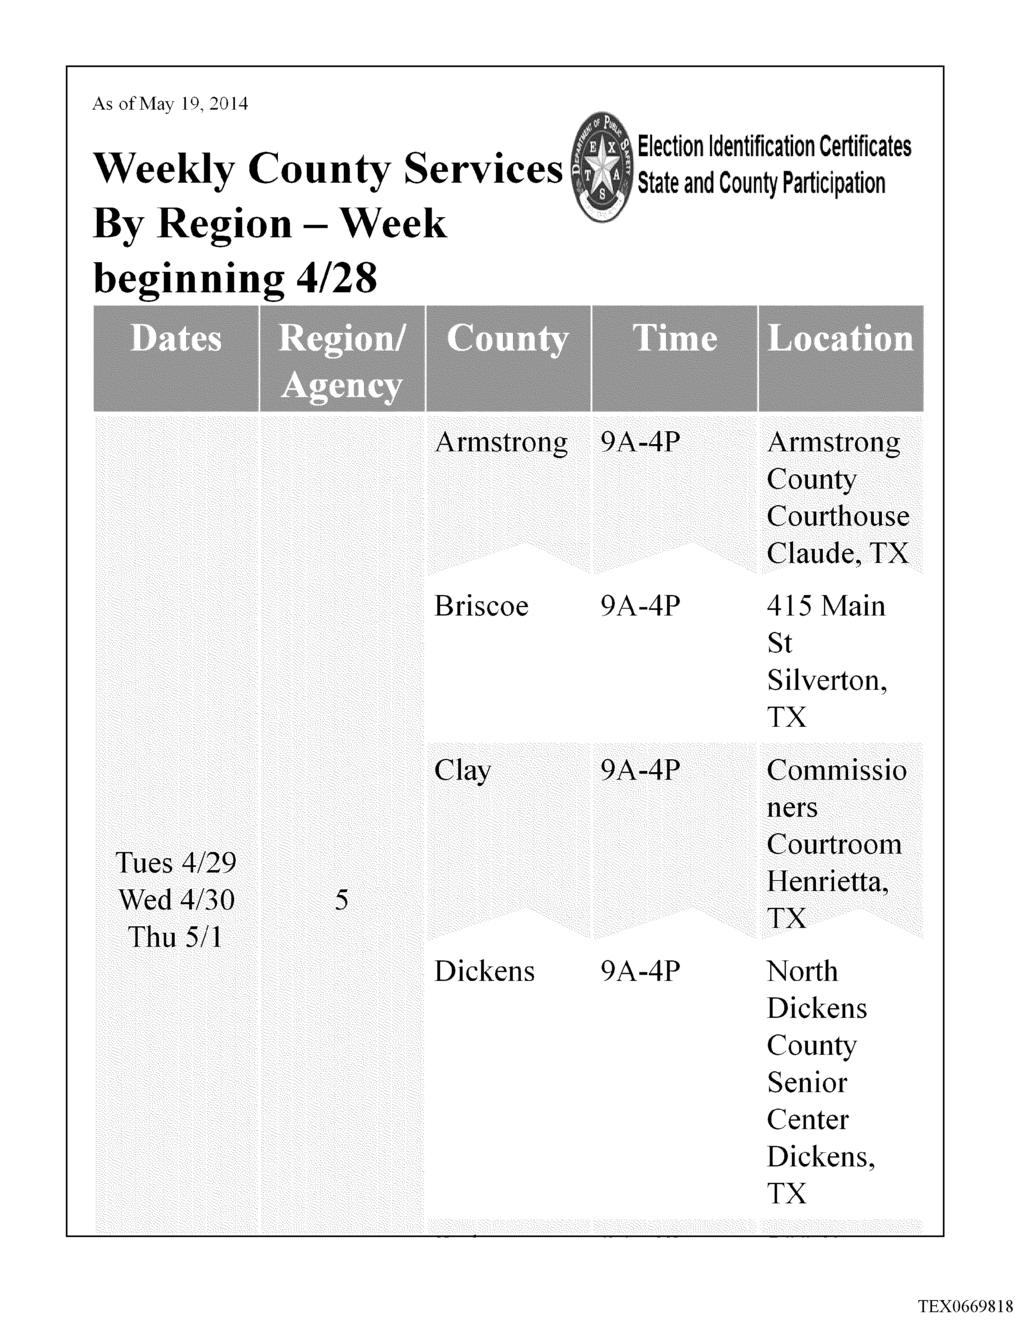 Case :13-cv-00193 Document 790-10 Filed in TXSD on 11/19/14 Page 10 of 1 Weekly Services By Region beginning 48 Week Election Identification Certificates State and Participation